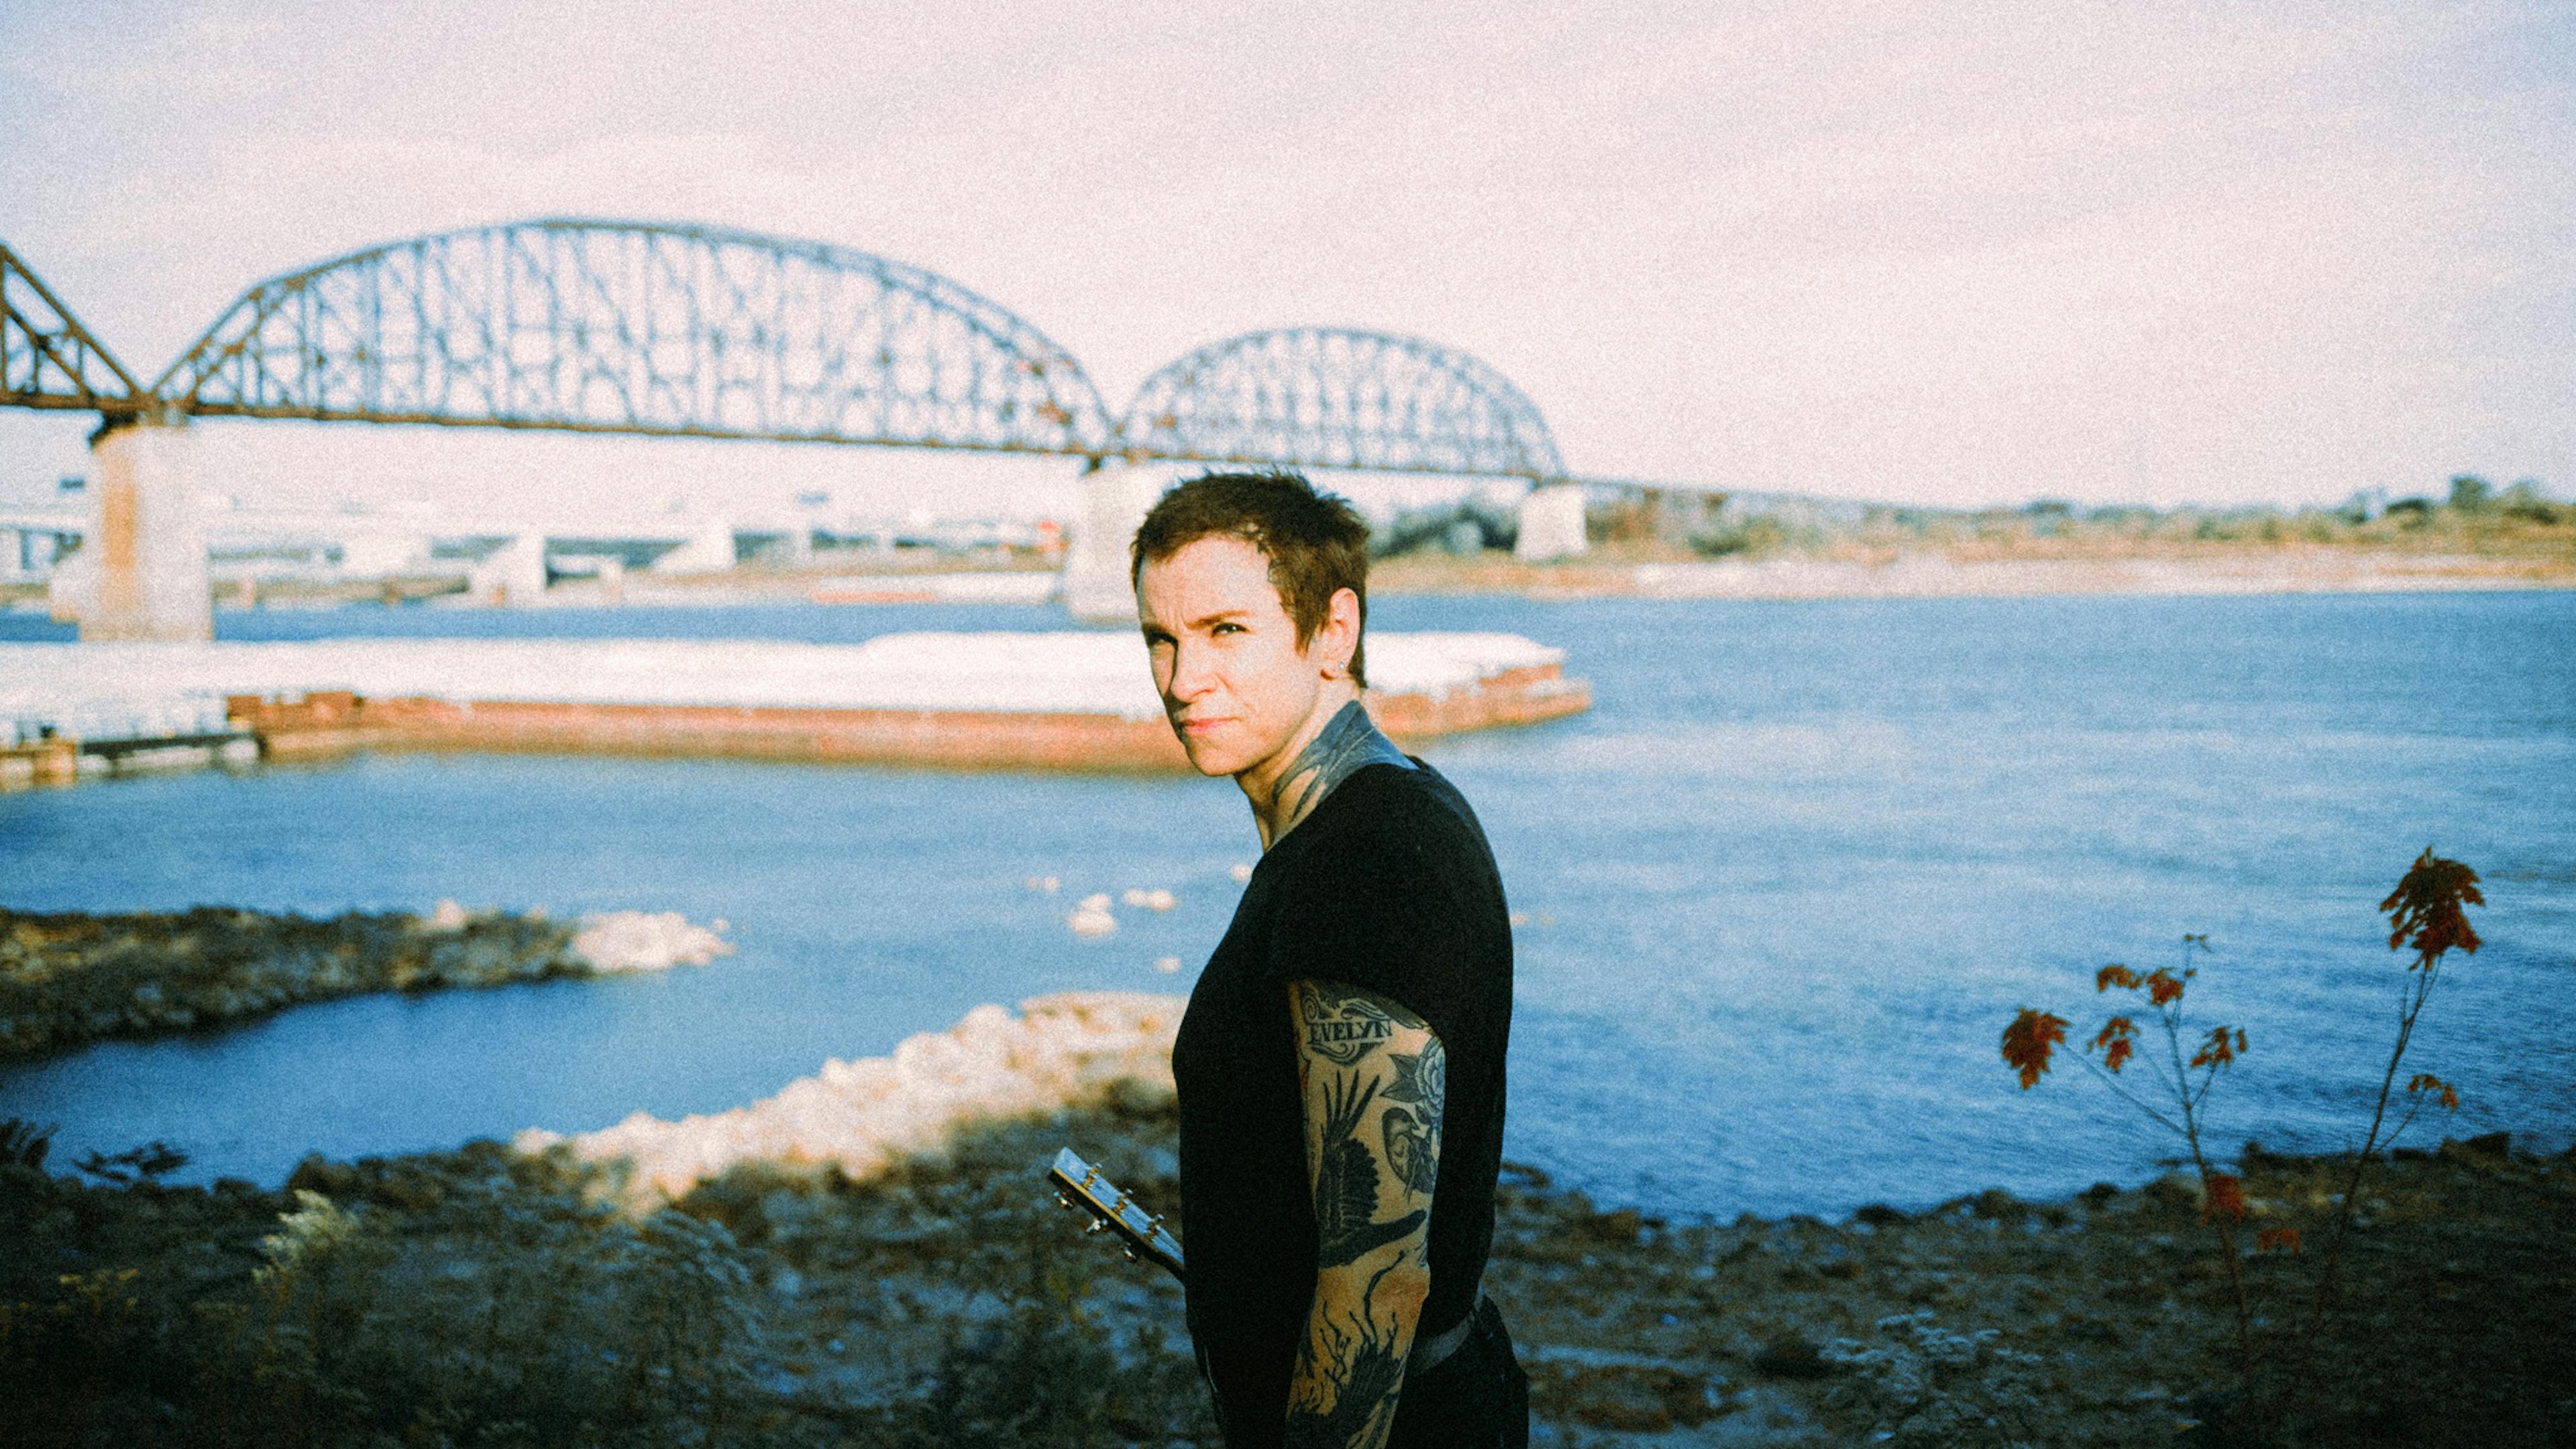 Listen to Laura Jane Grace’s moving new single, Cuffing Season